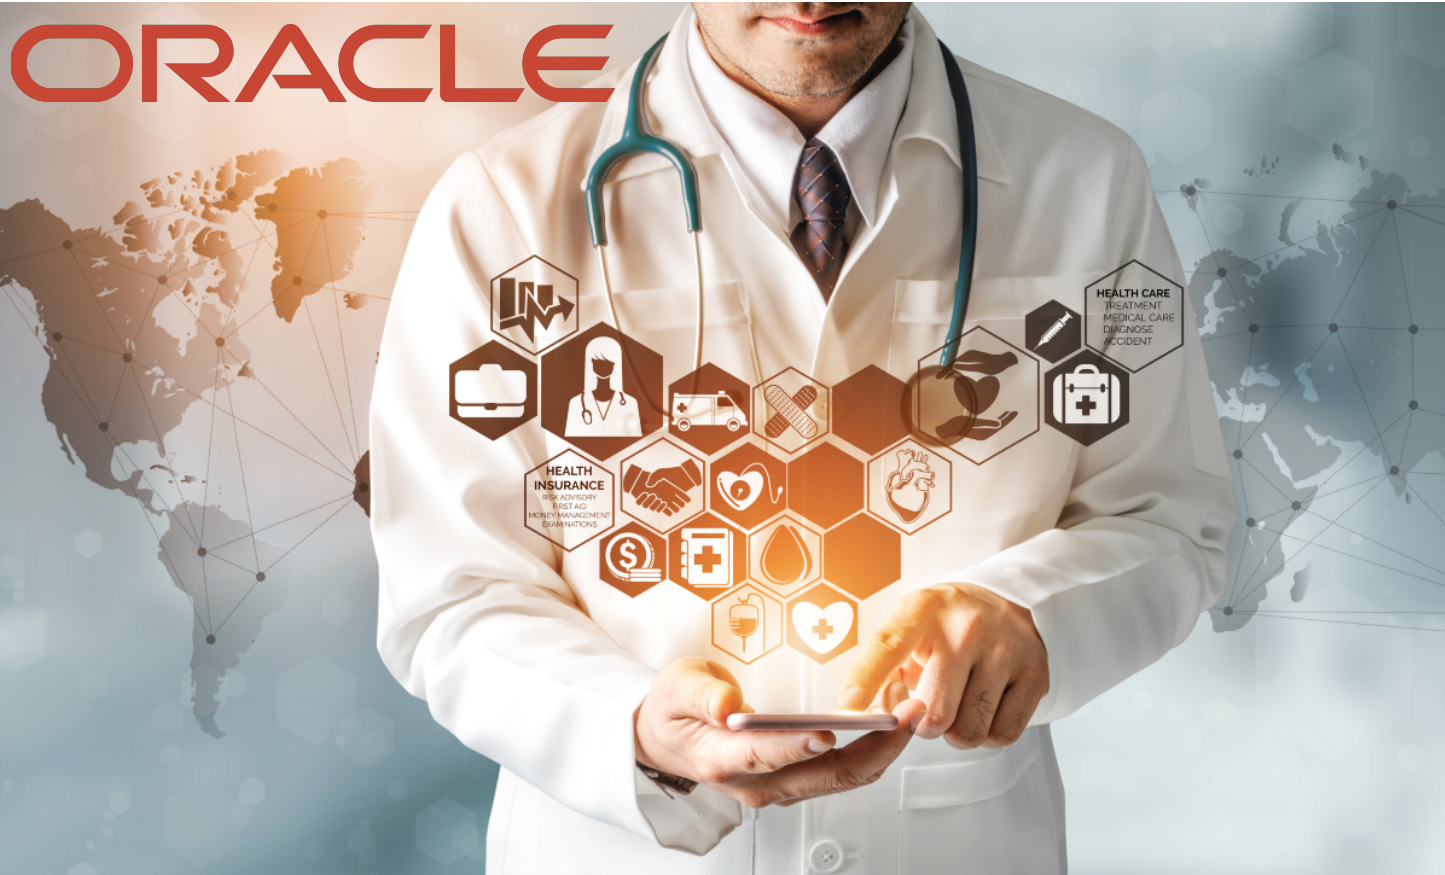 Oracle Healthcare: Health Management System Review